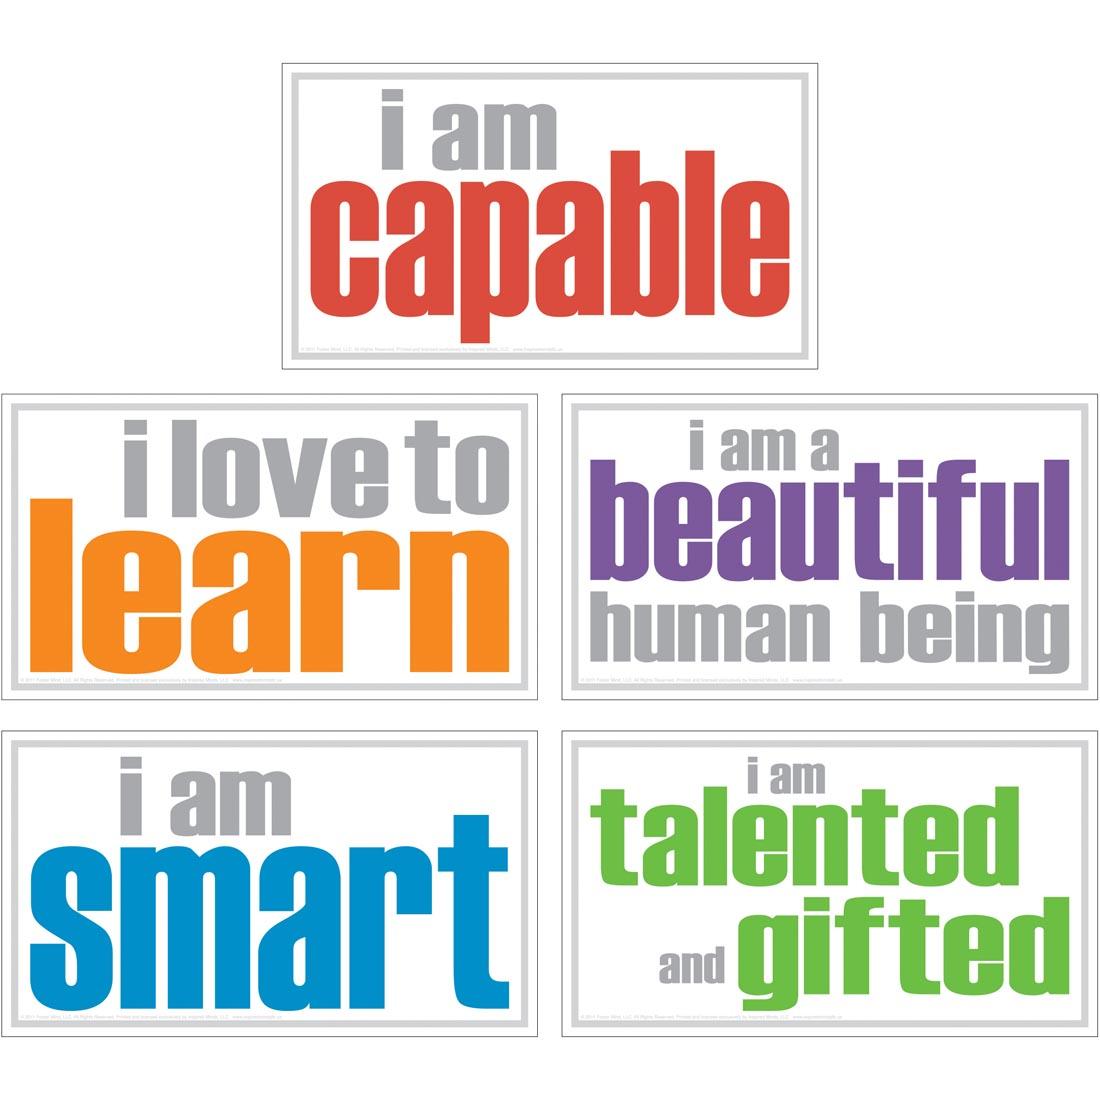 Inspired Minds Poster Set includes the messages I am capable, I love to learn, I am a beautiful human being, I am smart, I am talented and gifted